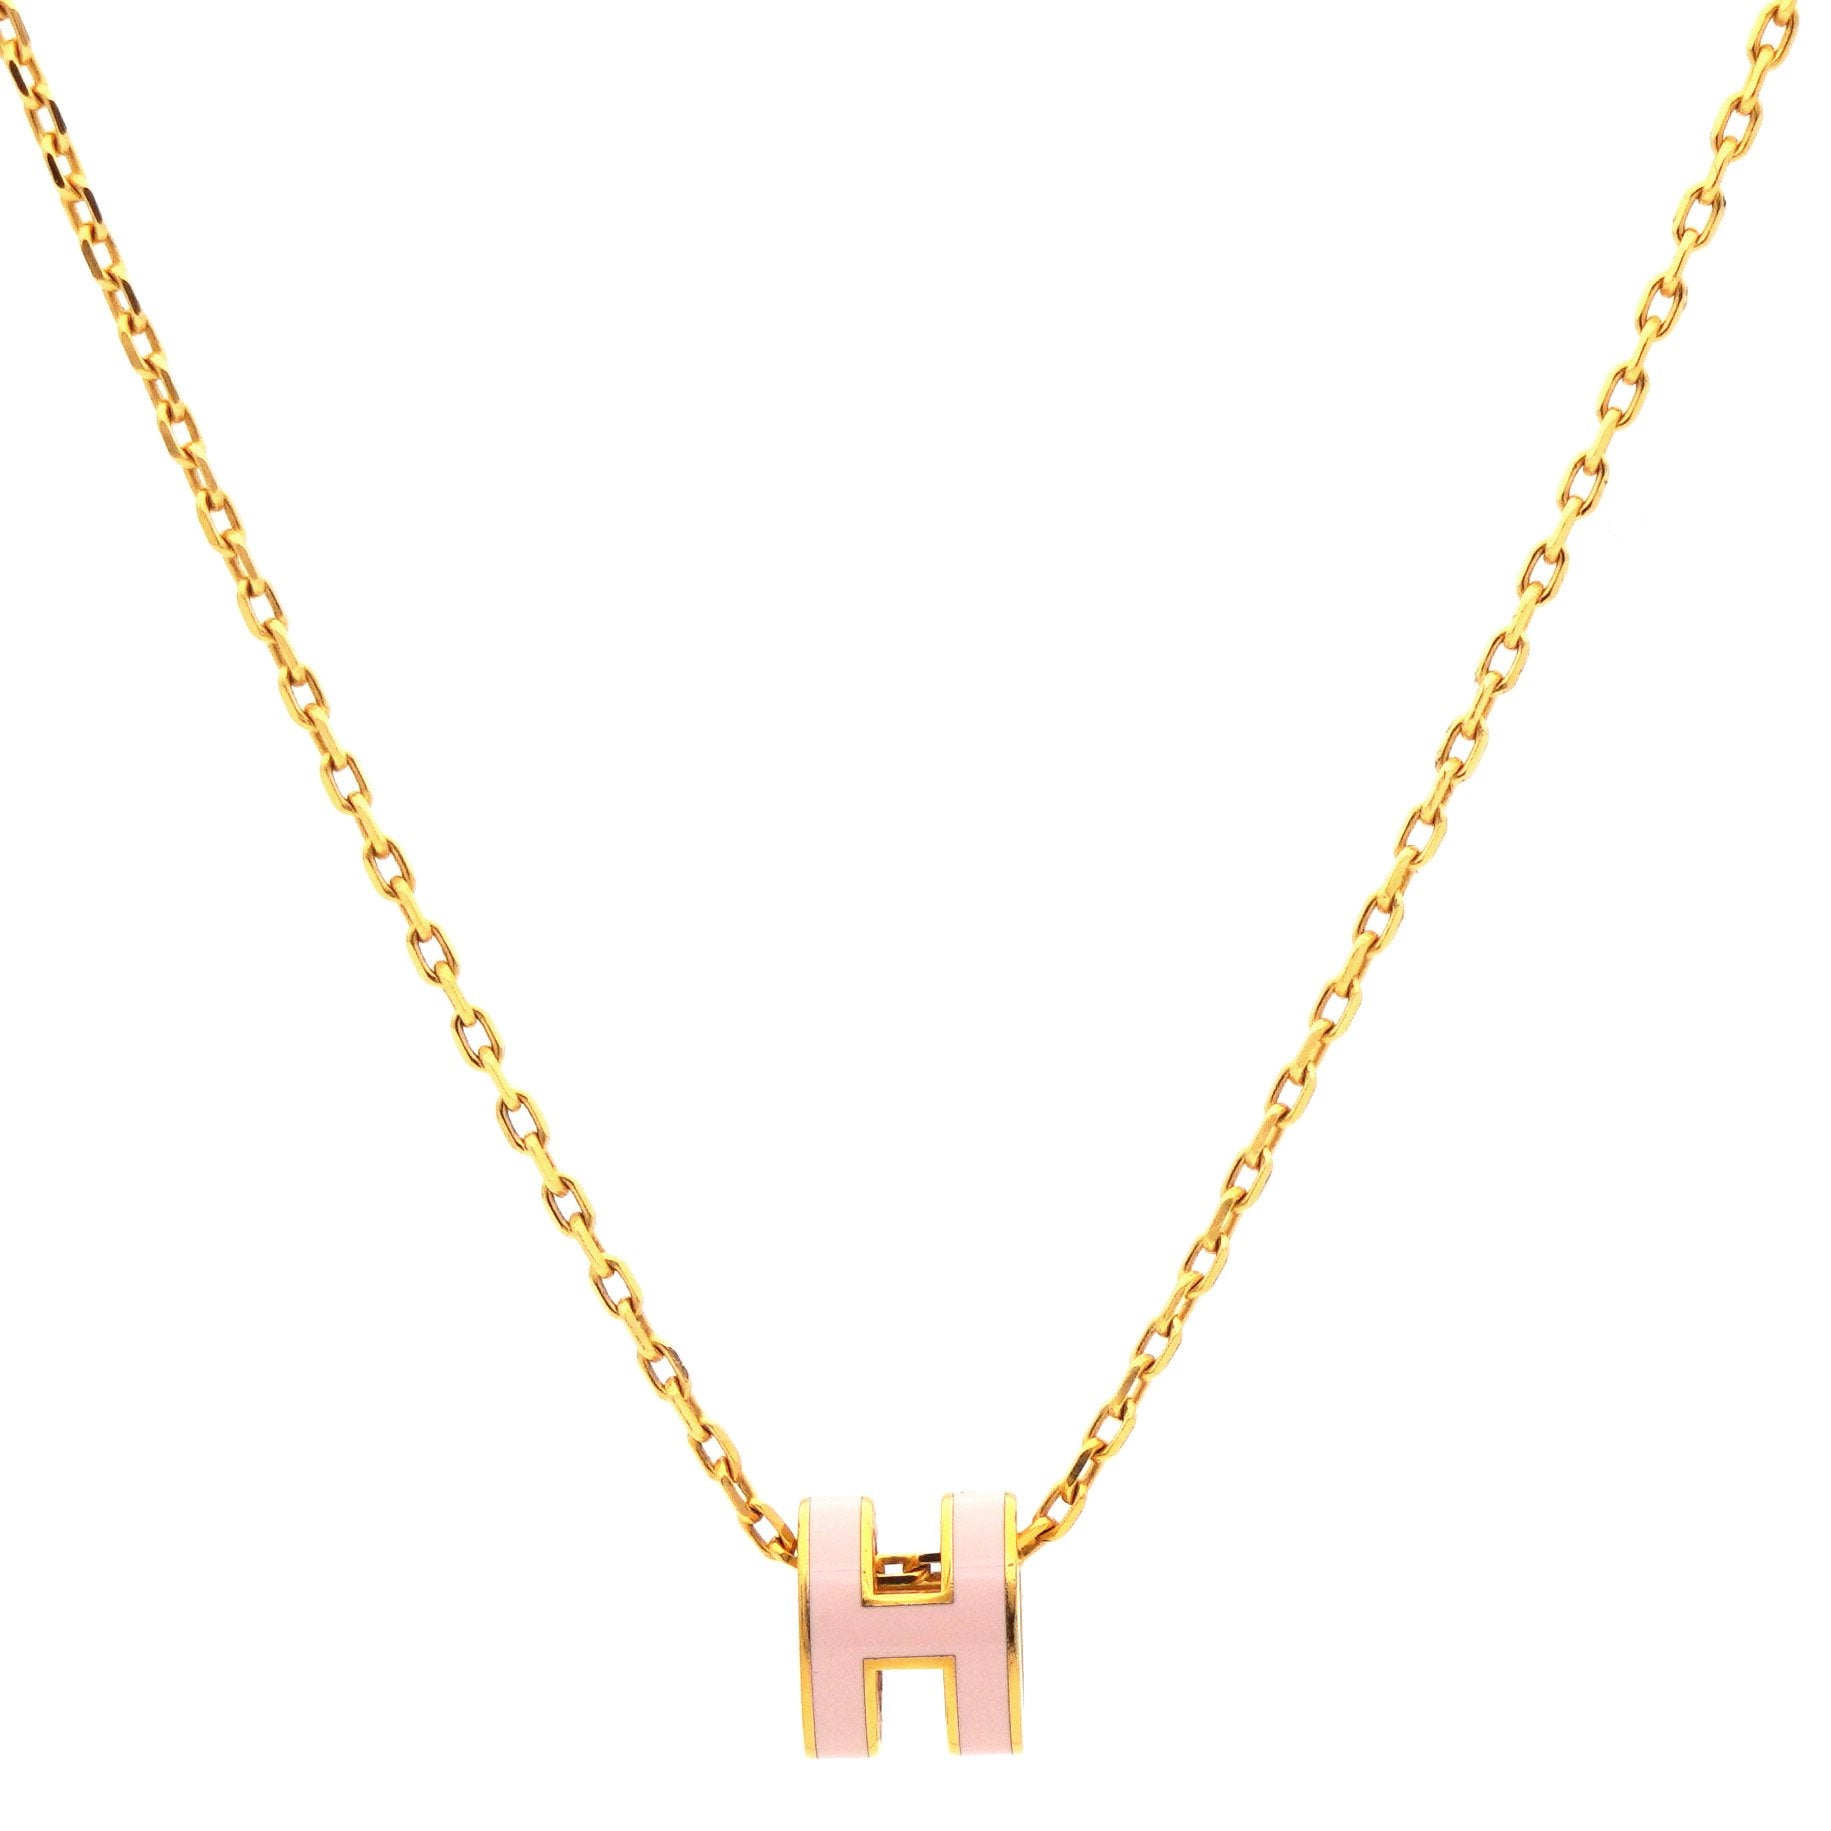 Pop H Mini Pink Lacquer Gold Plated Pendant